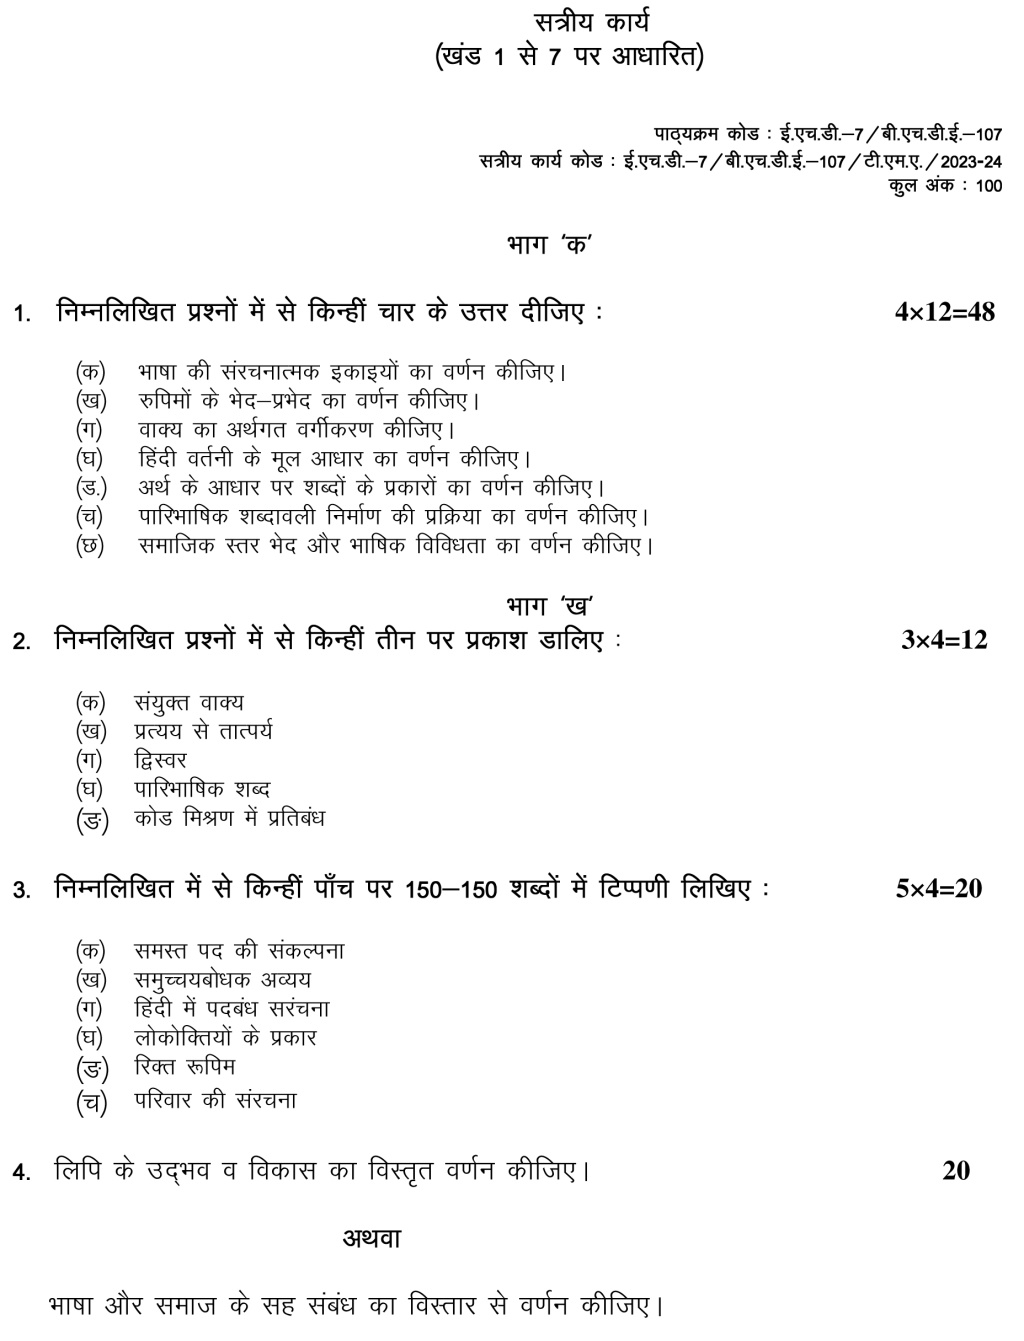 IGNOU EHD-07/BHDE-107 - Hindi Sanrachna Latest Solved Assignment-July 2023 – January 2024